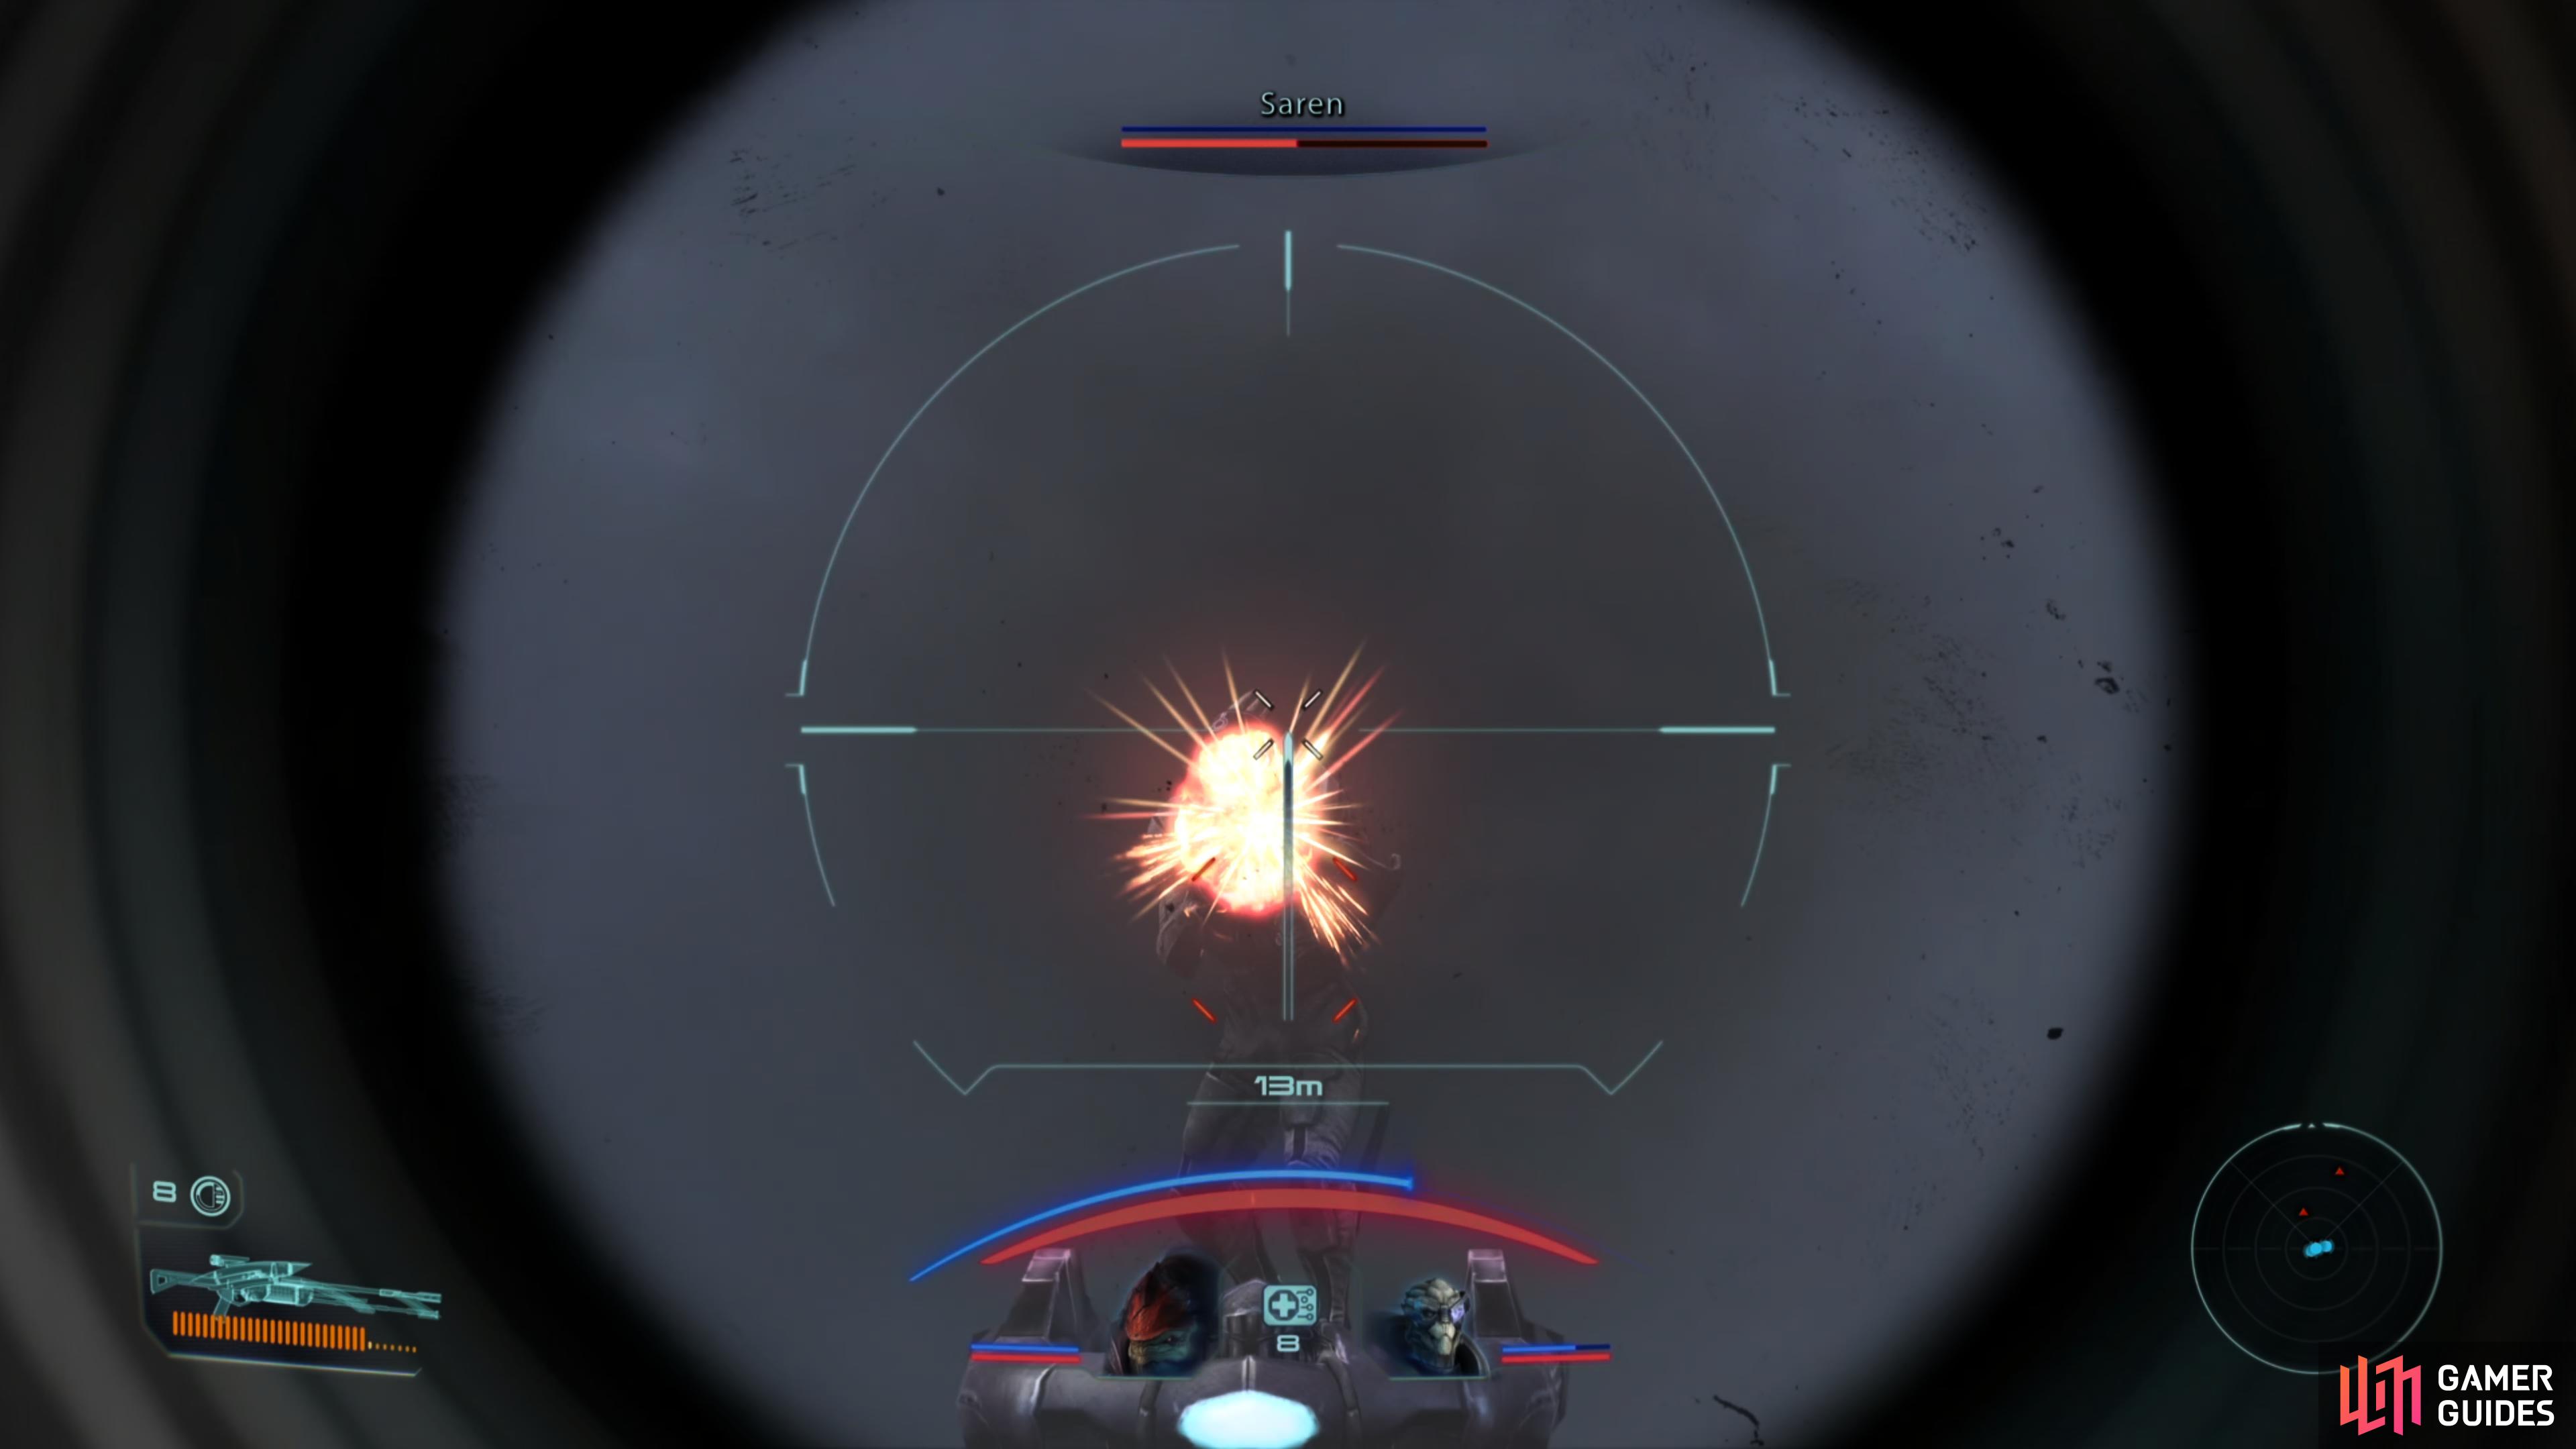 When enough fodder has been removed, focus on depleting Saren's health bar - a few good sniper shots can do the trick.